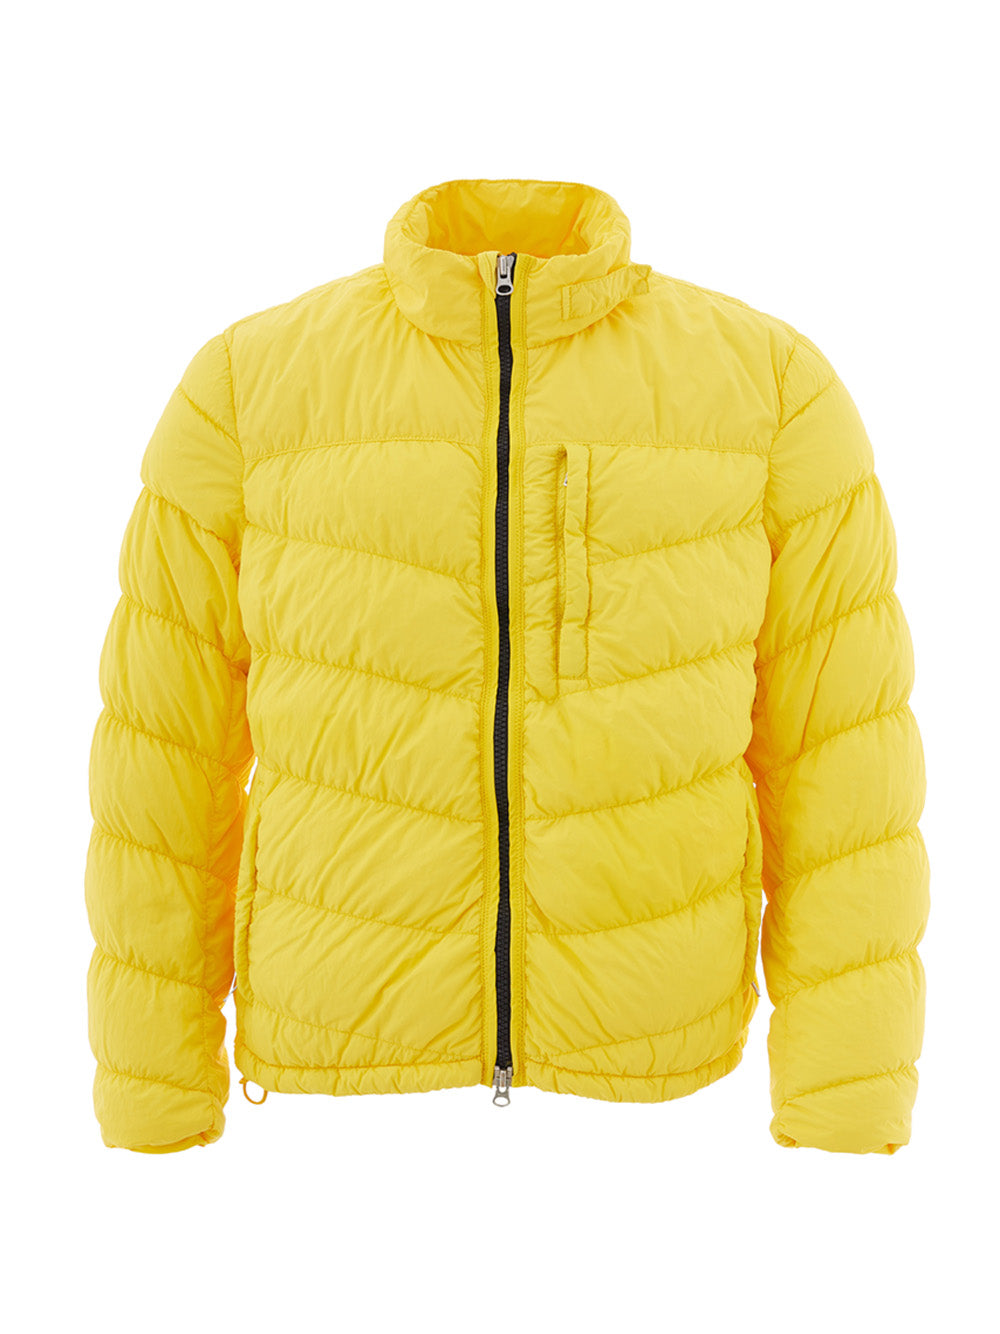 Woolrich Yellow Down Jacket